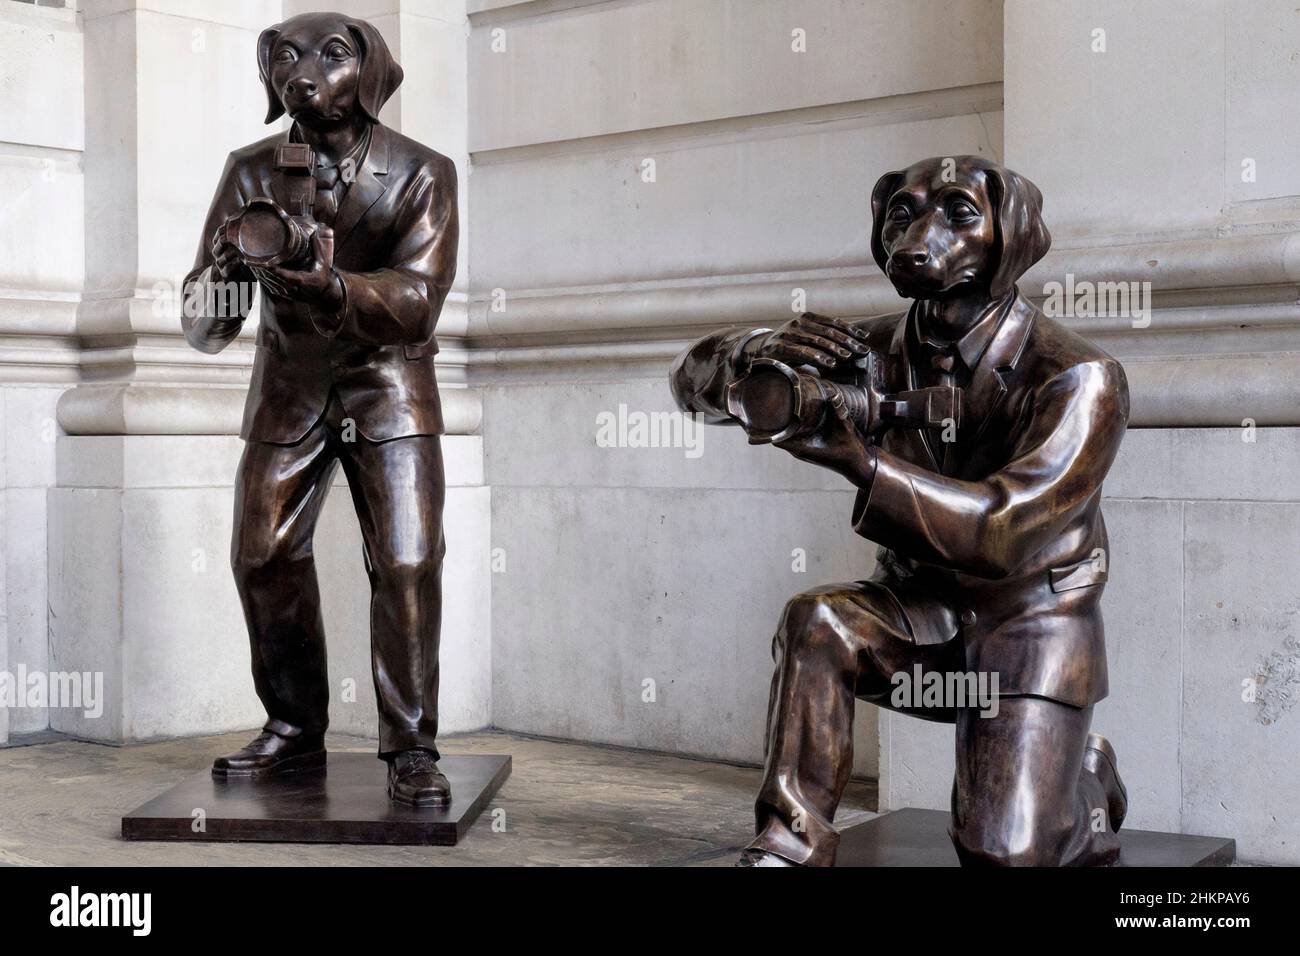 Paparazzi Dogs; bronze sculptures by New York based artistic duo Gillie and Marc on public display at the entrance to The Royal Exchange, London, UK. Stock Photo